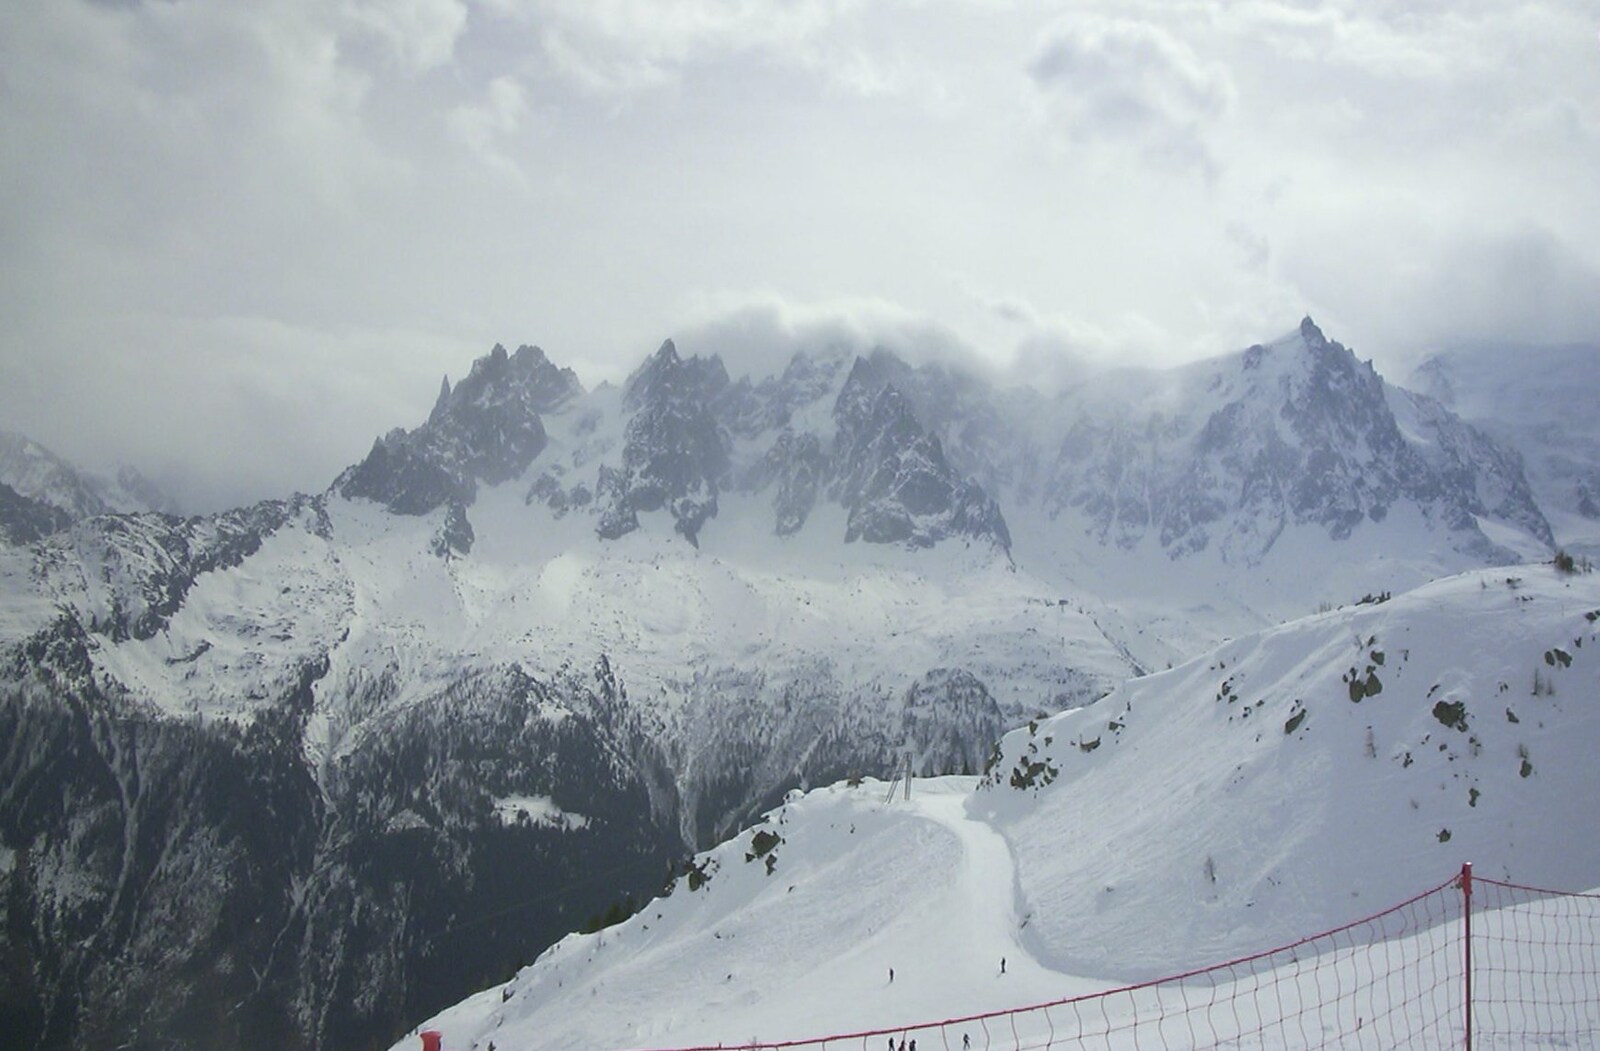 A mountain view from 3G Lab Goes Skiing In Chamonix, France - 12th March 2002